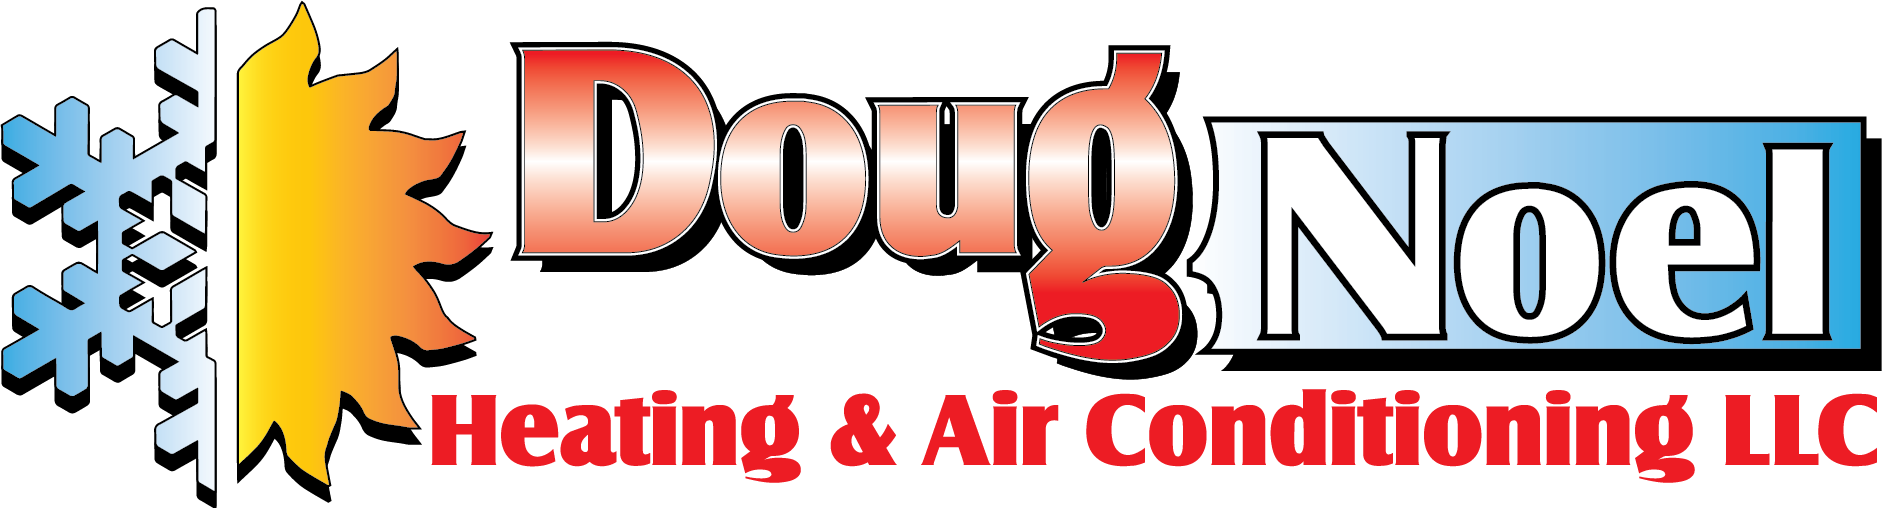 Doug Noel Heating and Air Conditioning, LLC